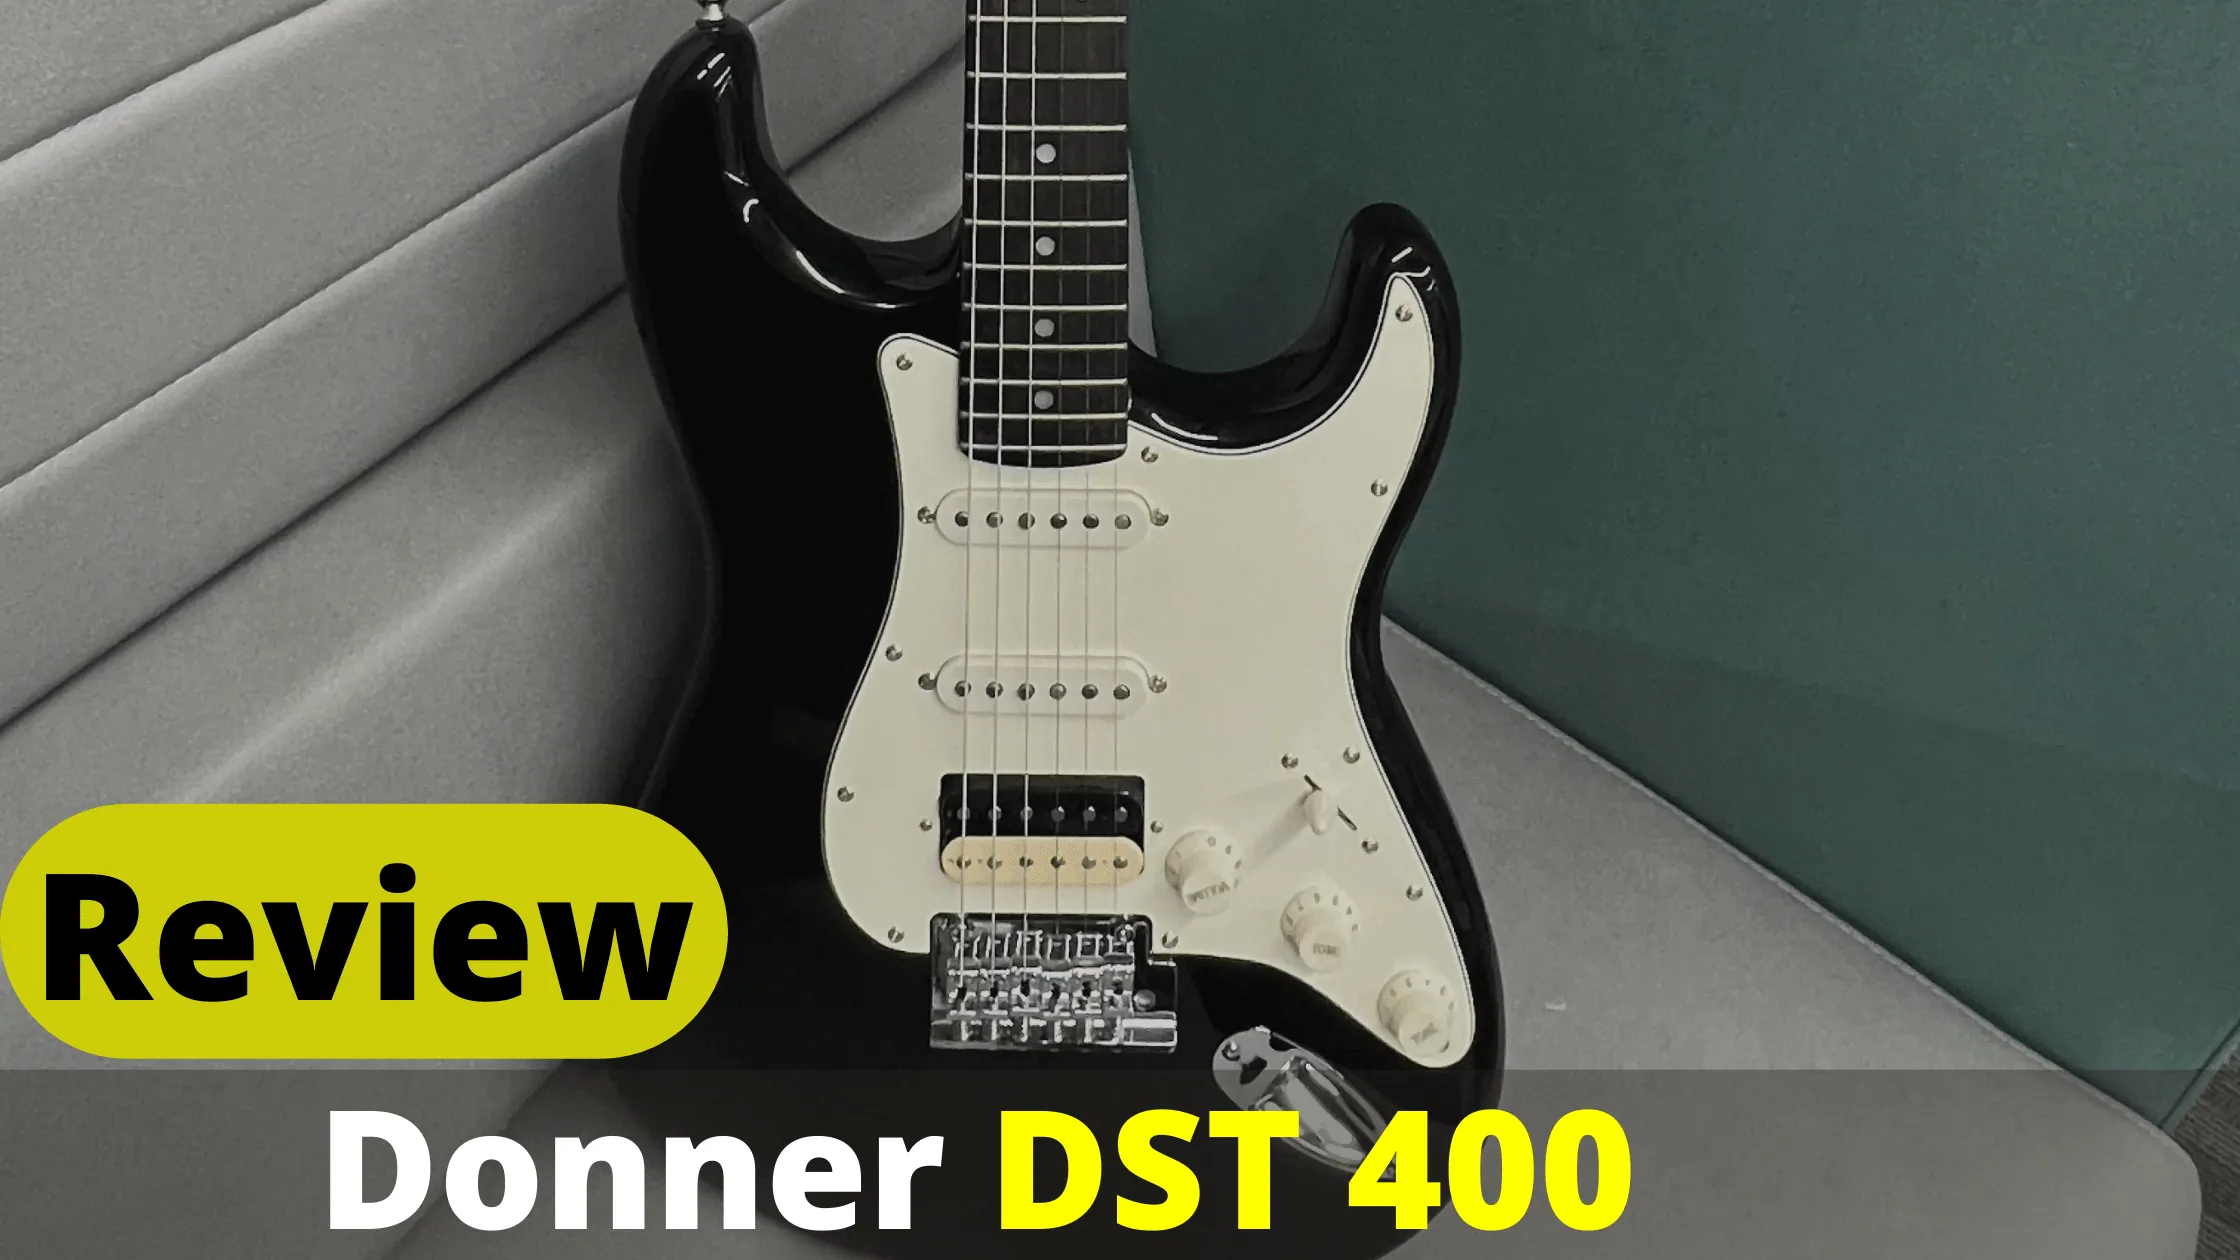 Donner DST 400 Review - Complete Guide